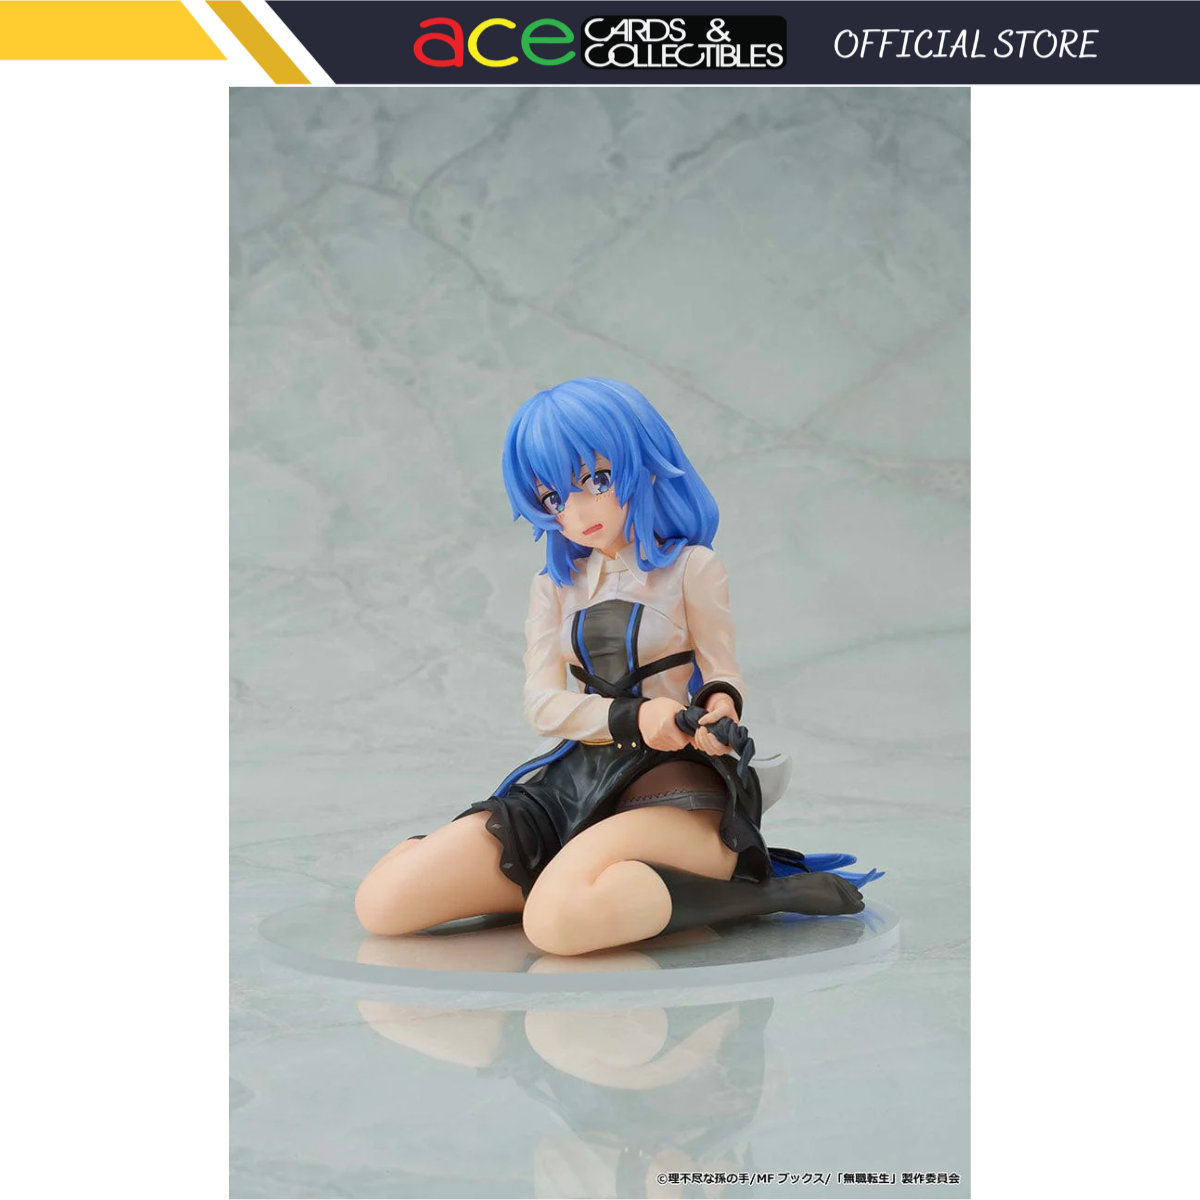 Mushoku Tensei Jobless Reincarnation 1/6 Scale Painted Finished Figure "Roxy Migurdia" (water splash ver.)-SOL Internatinal co-Ace Cards & Collectibles